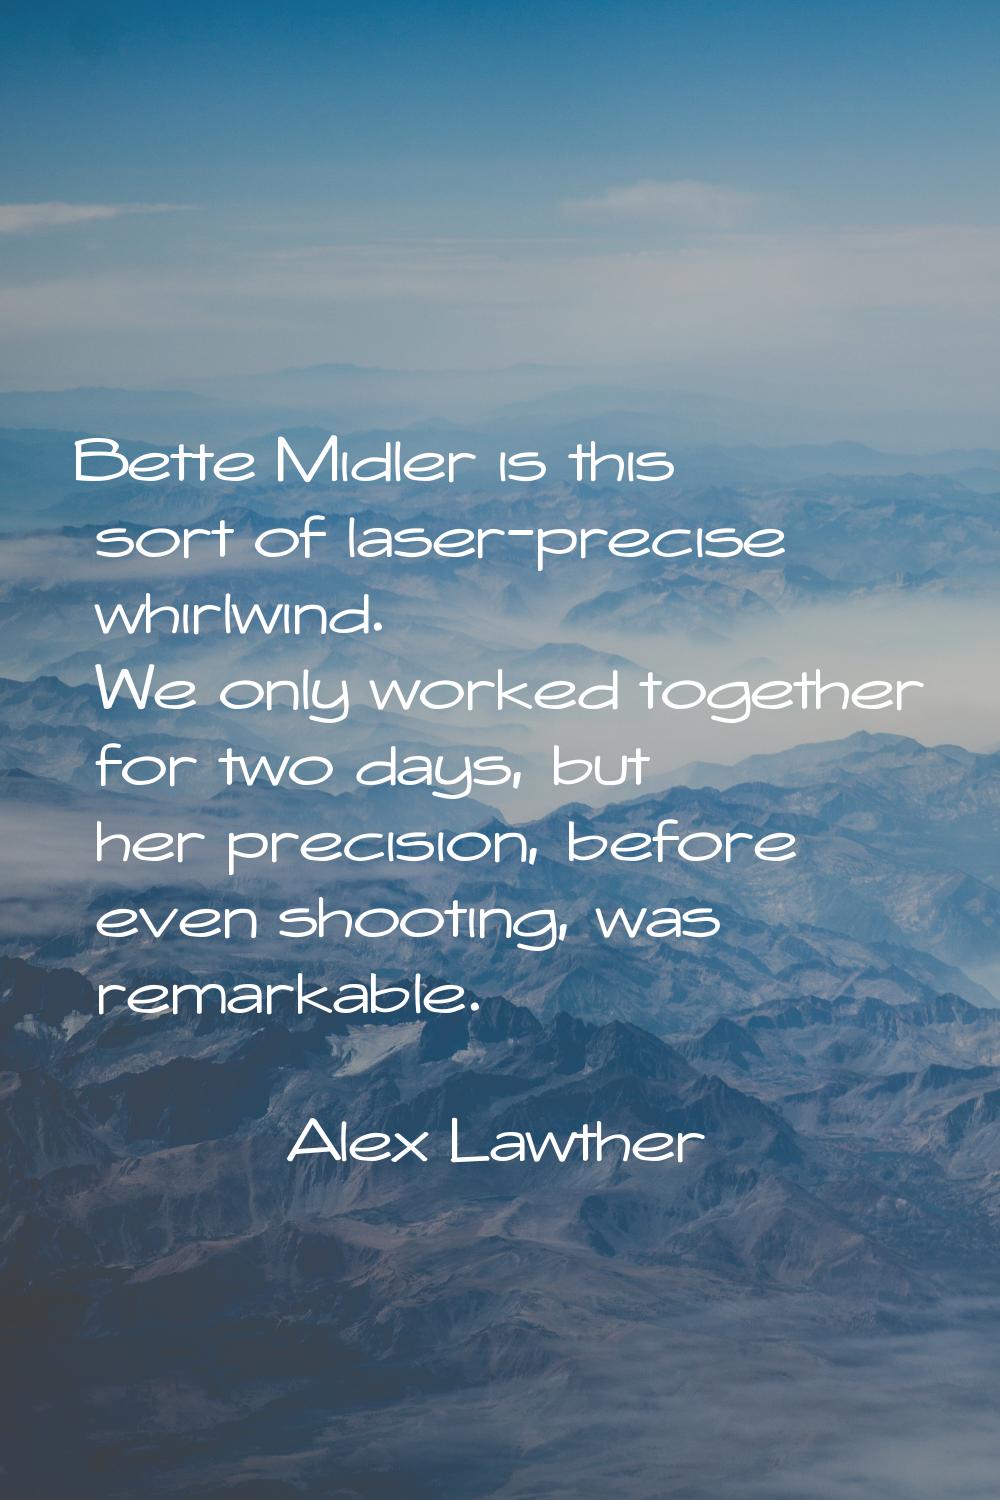 Bette Midler is this sort of laser-precise whirlwind. We only worked together for two days, but her